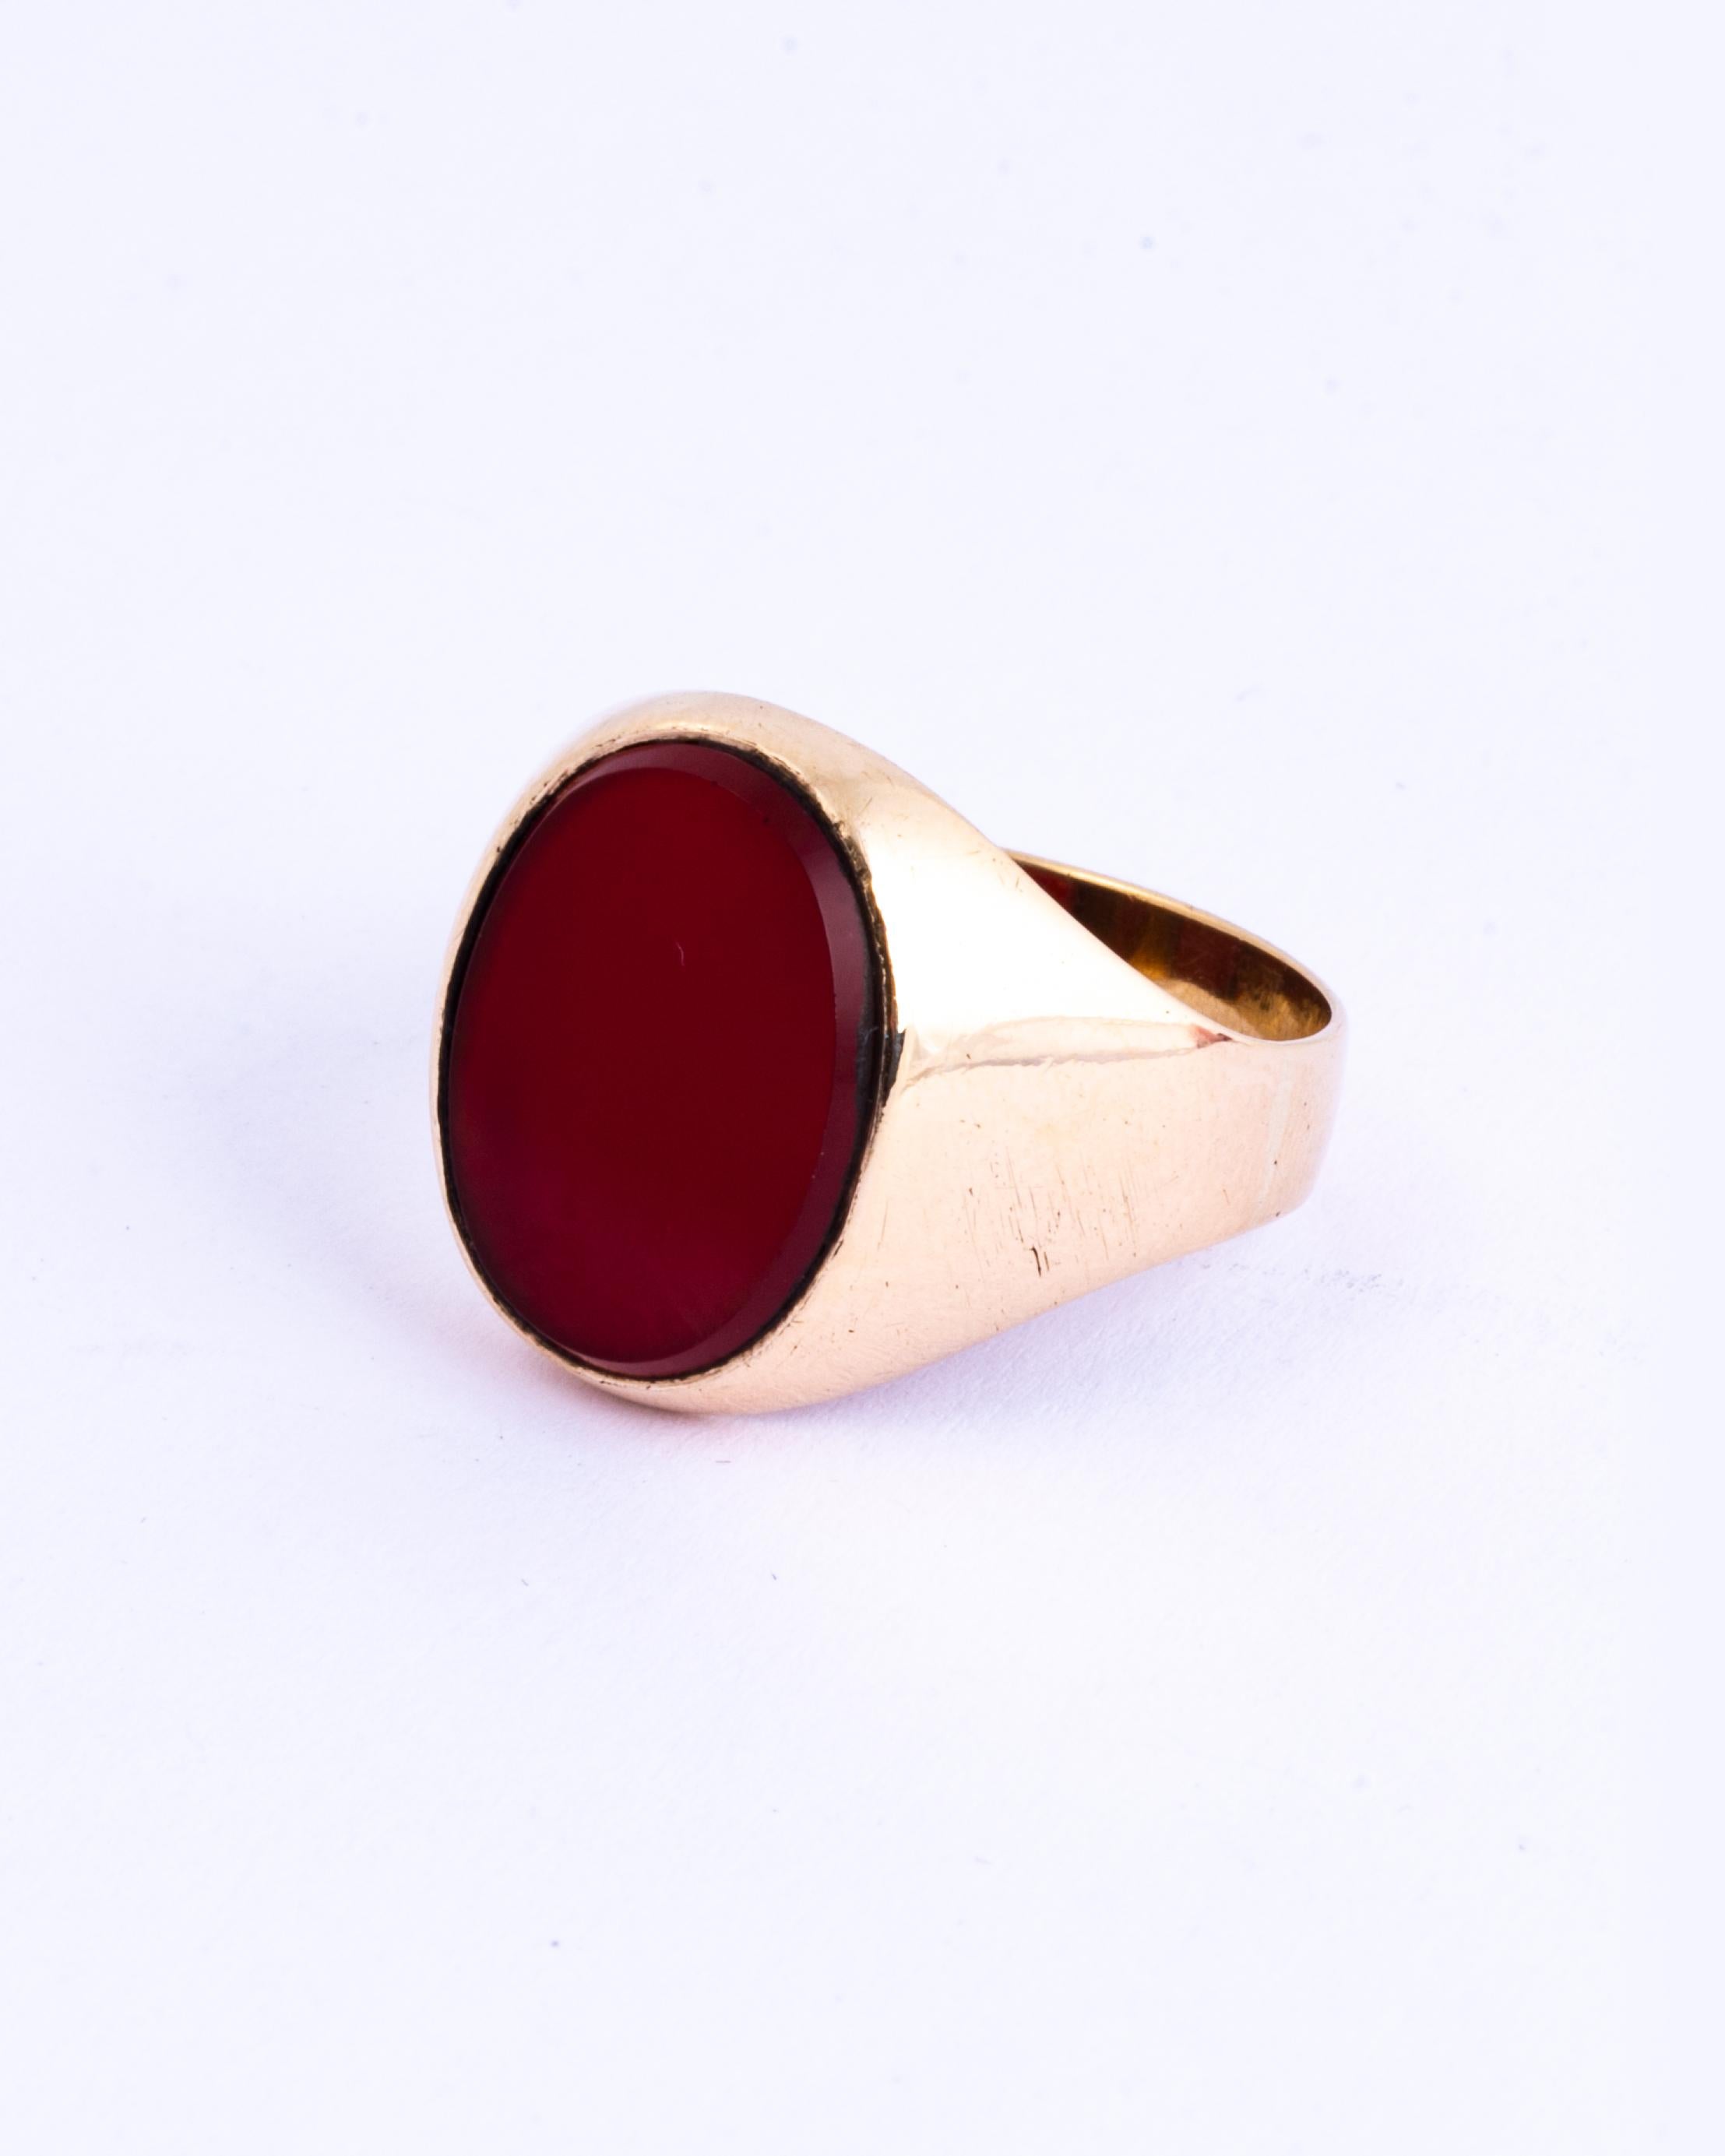 A fine vintage signet ring set with a flat cut oval carnelian Modelled in 9 carat yellow gold. 

Ring Size: T or 9 1/2
Stone Dimensions: 16x12mm

Weight: 5.1